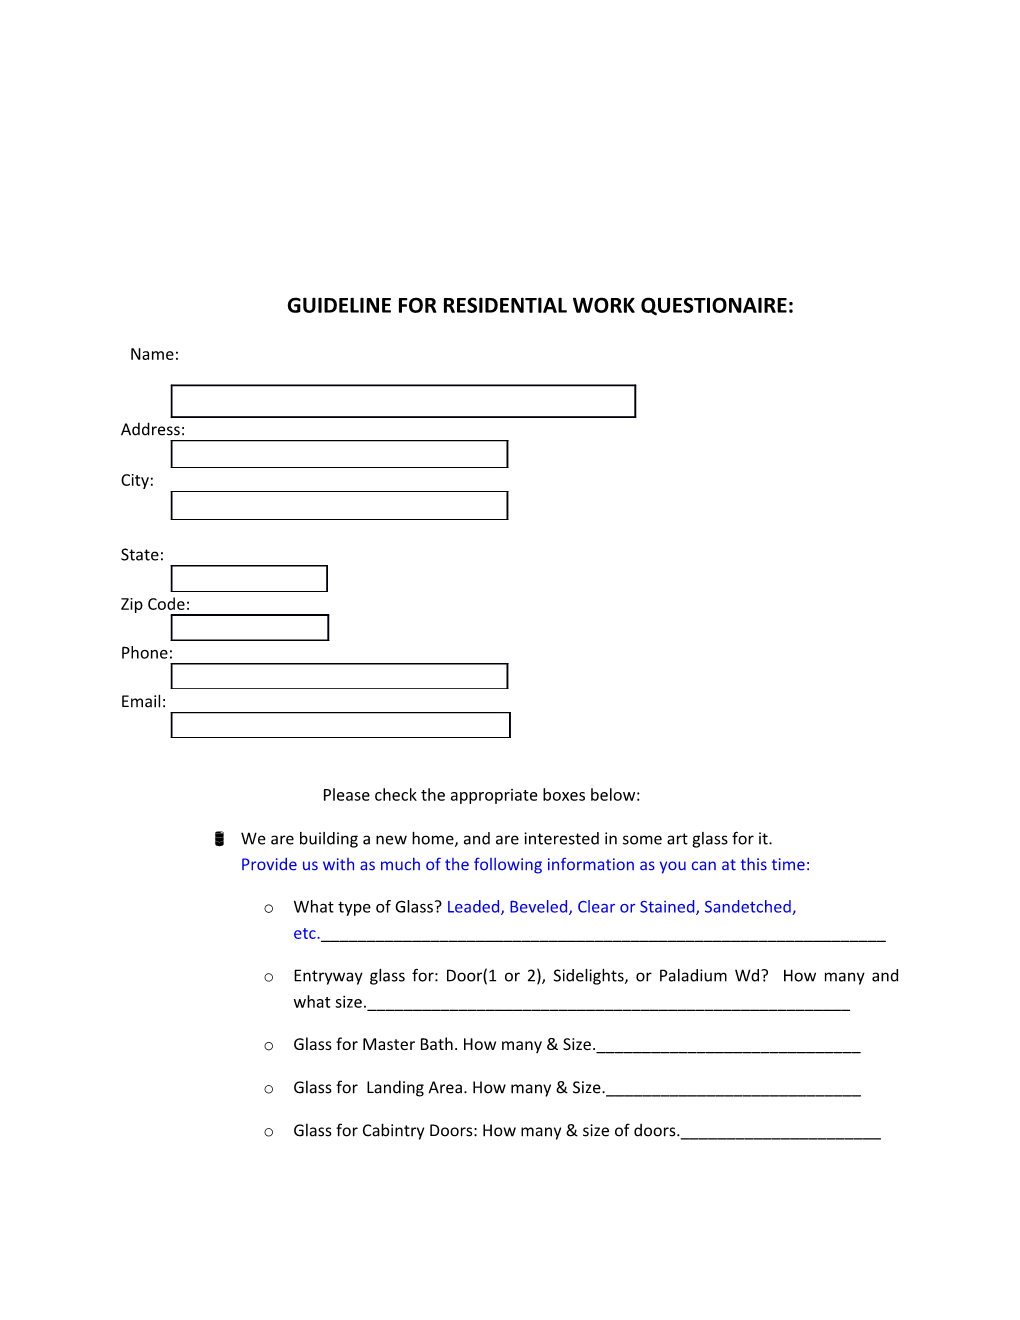 Guideline for Residential Work Questionaire